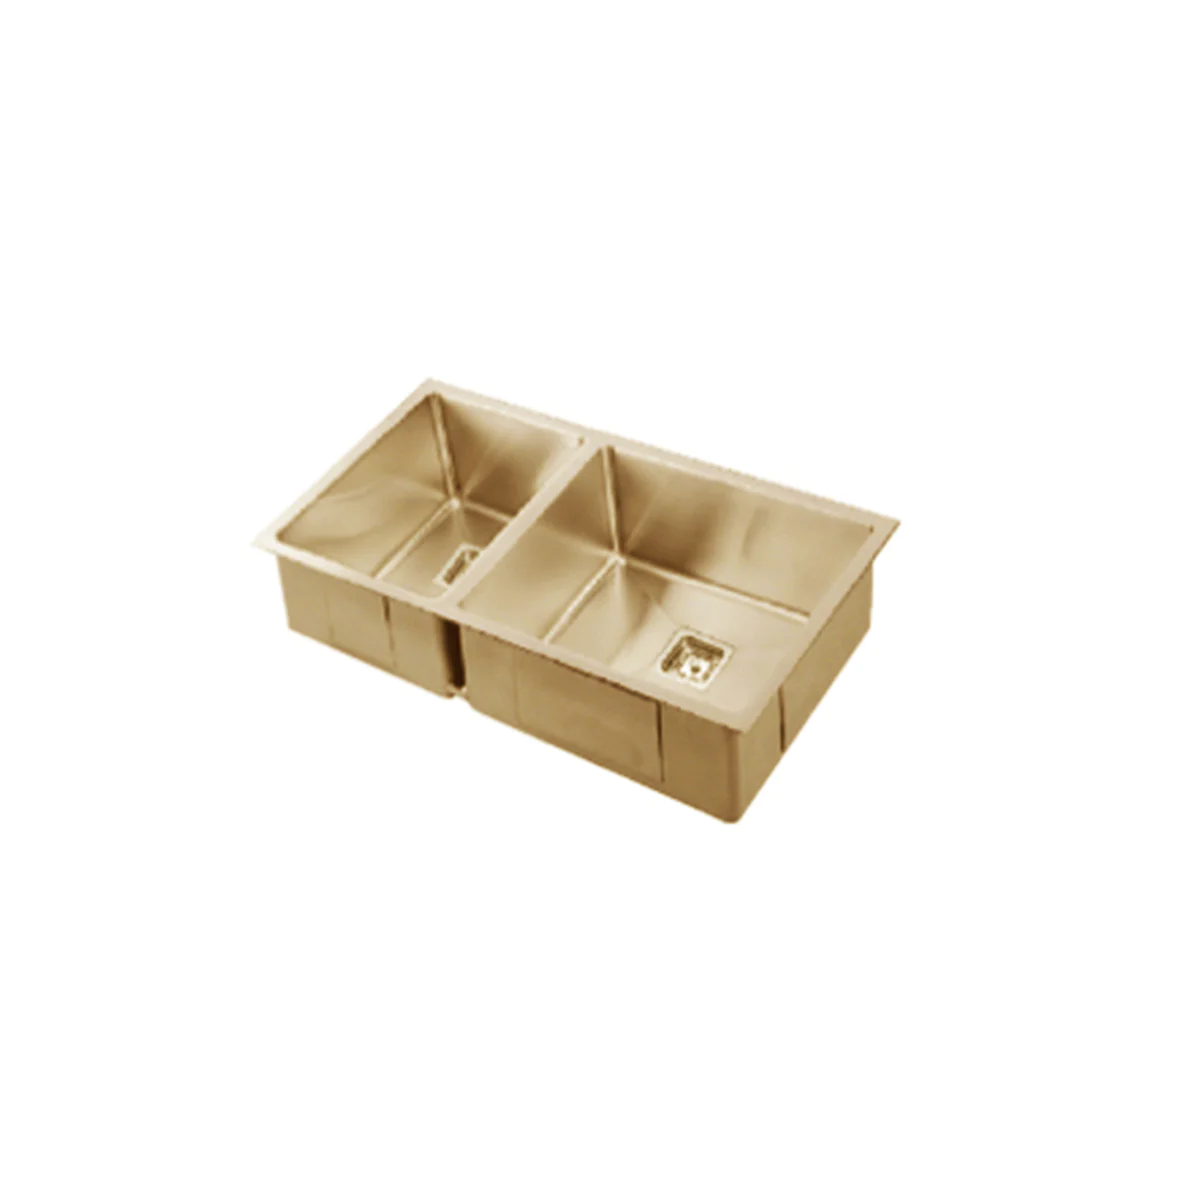 VEROTTI INOX 1 1/2 BOWL UNIVERSAL STAINLESS STEEL KITCHEN SINK BRUSHED BRASS 670MM (AVAILABLE IN LEFT OR RIGHT CONFIGURATION)